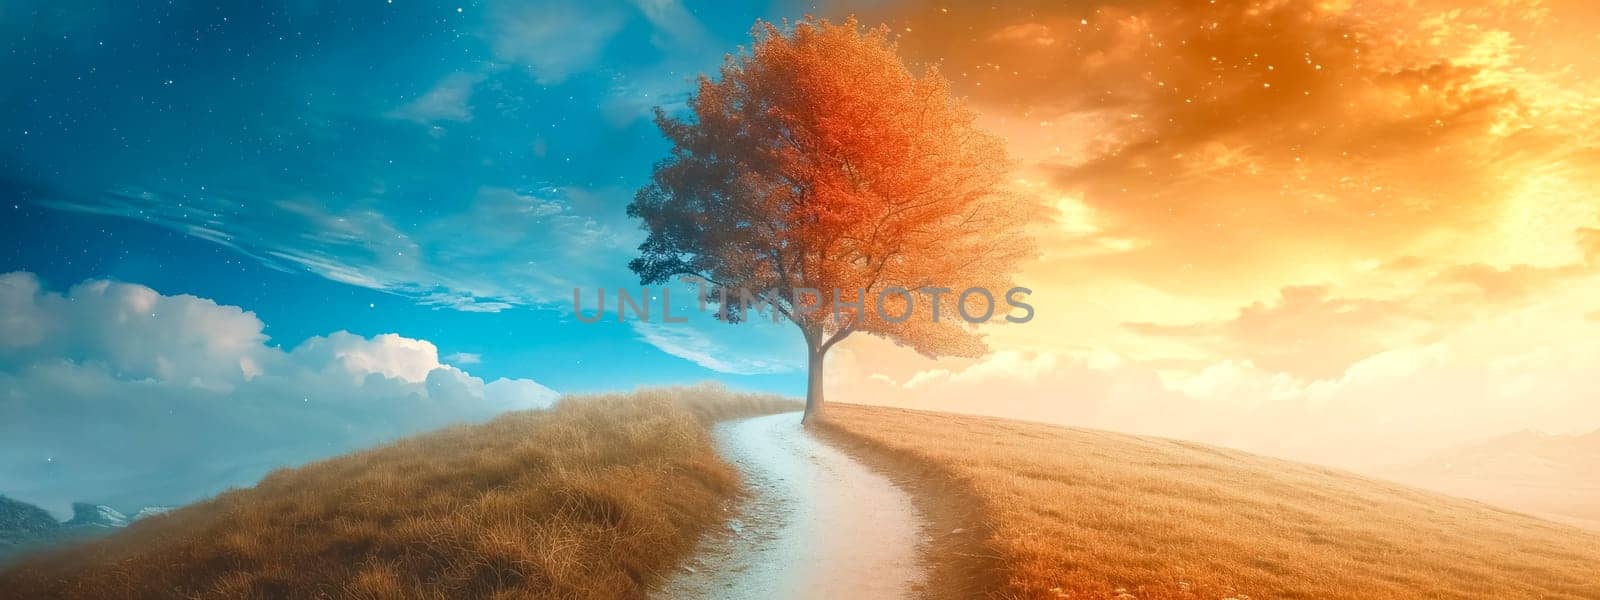 Scenic view of a split pathway under a vibrant tree with day and night sky merging, ideal for concept art, banner